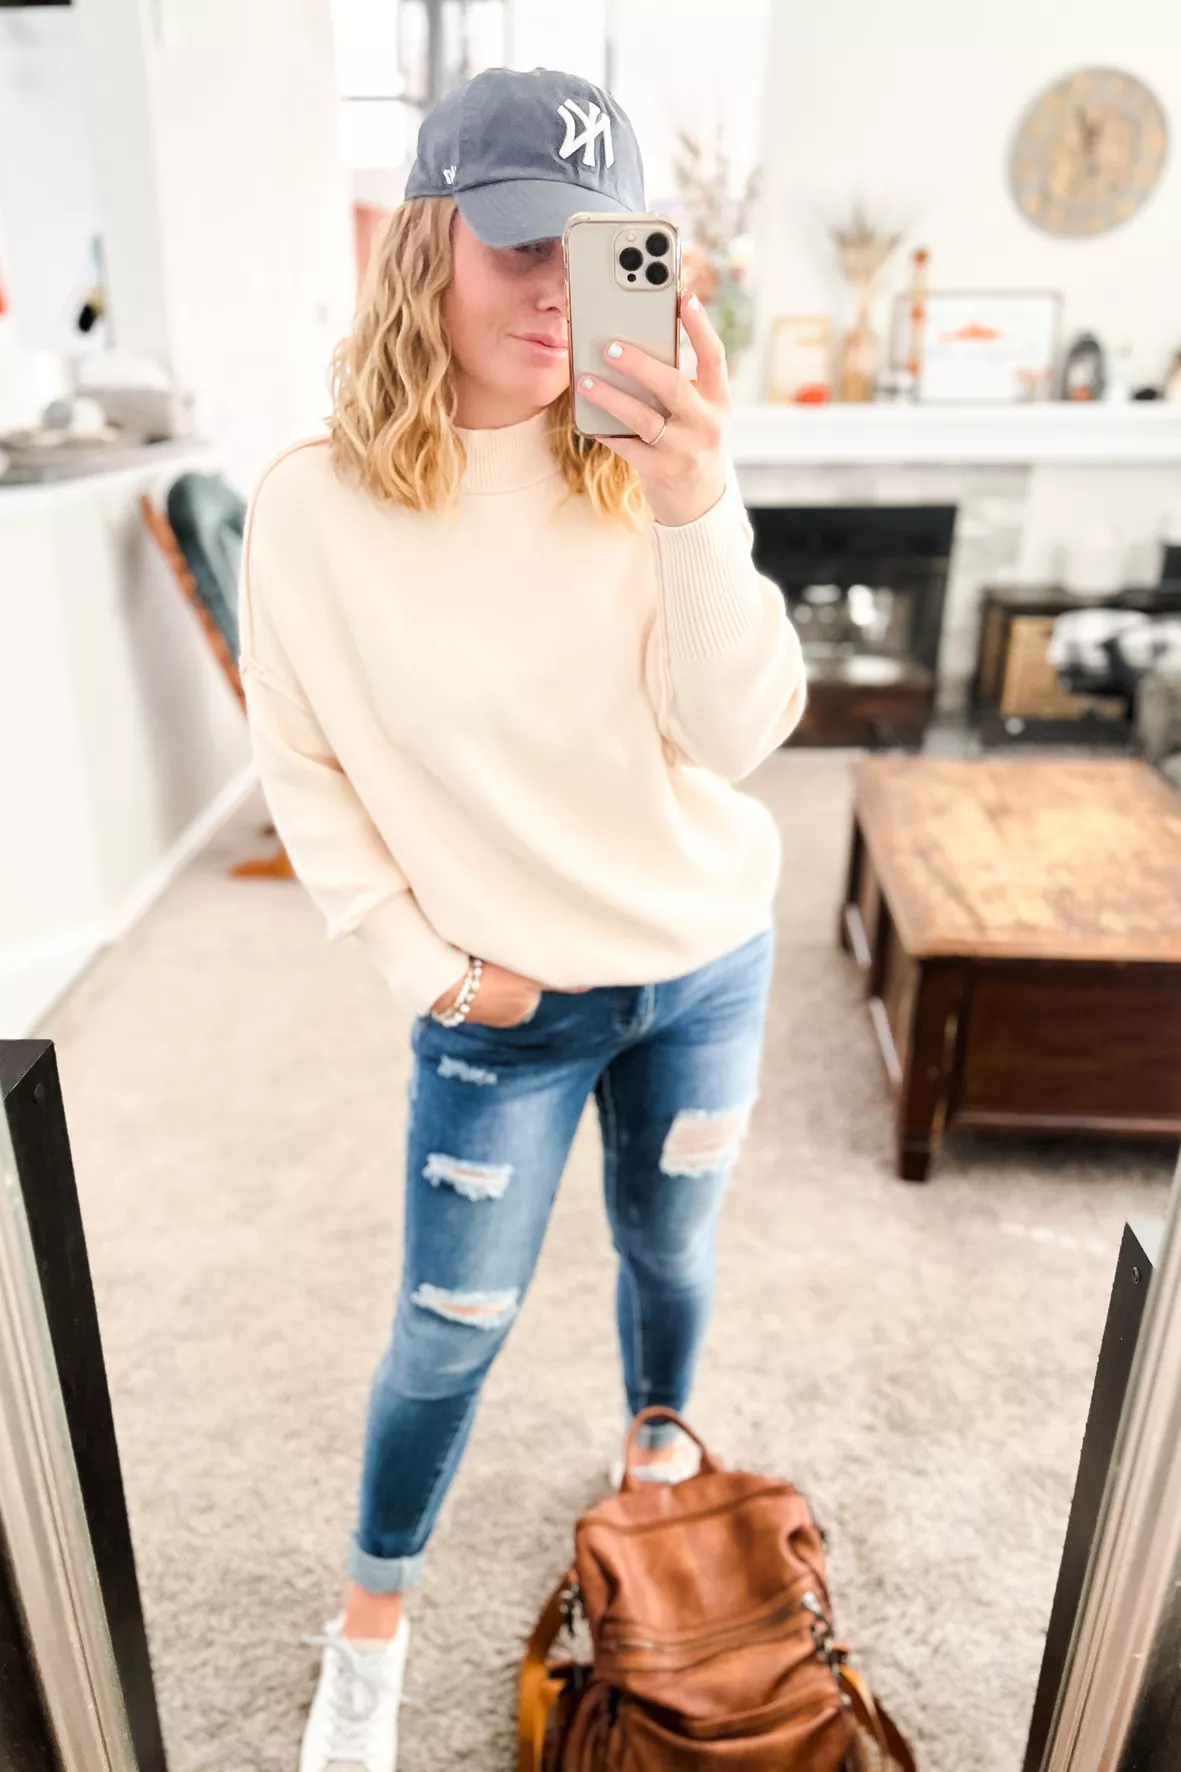 Fall Outfit with Jeans  Trendy mom outfits, Jeans outfit fall, Mom outfits  fall